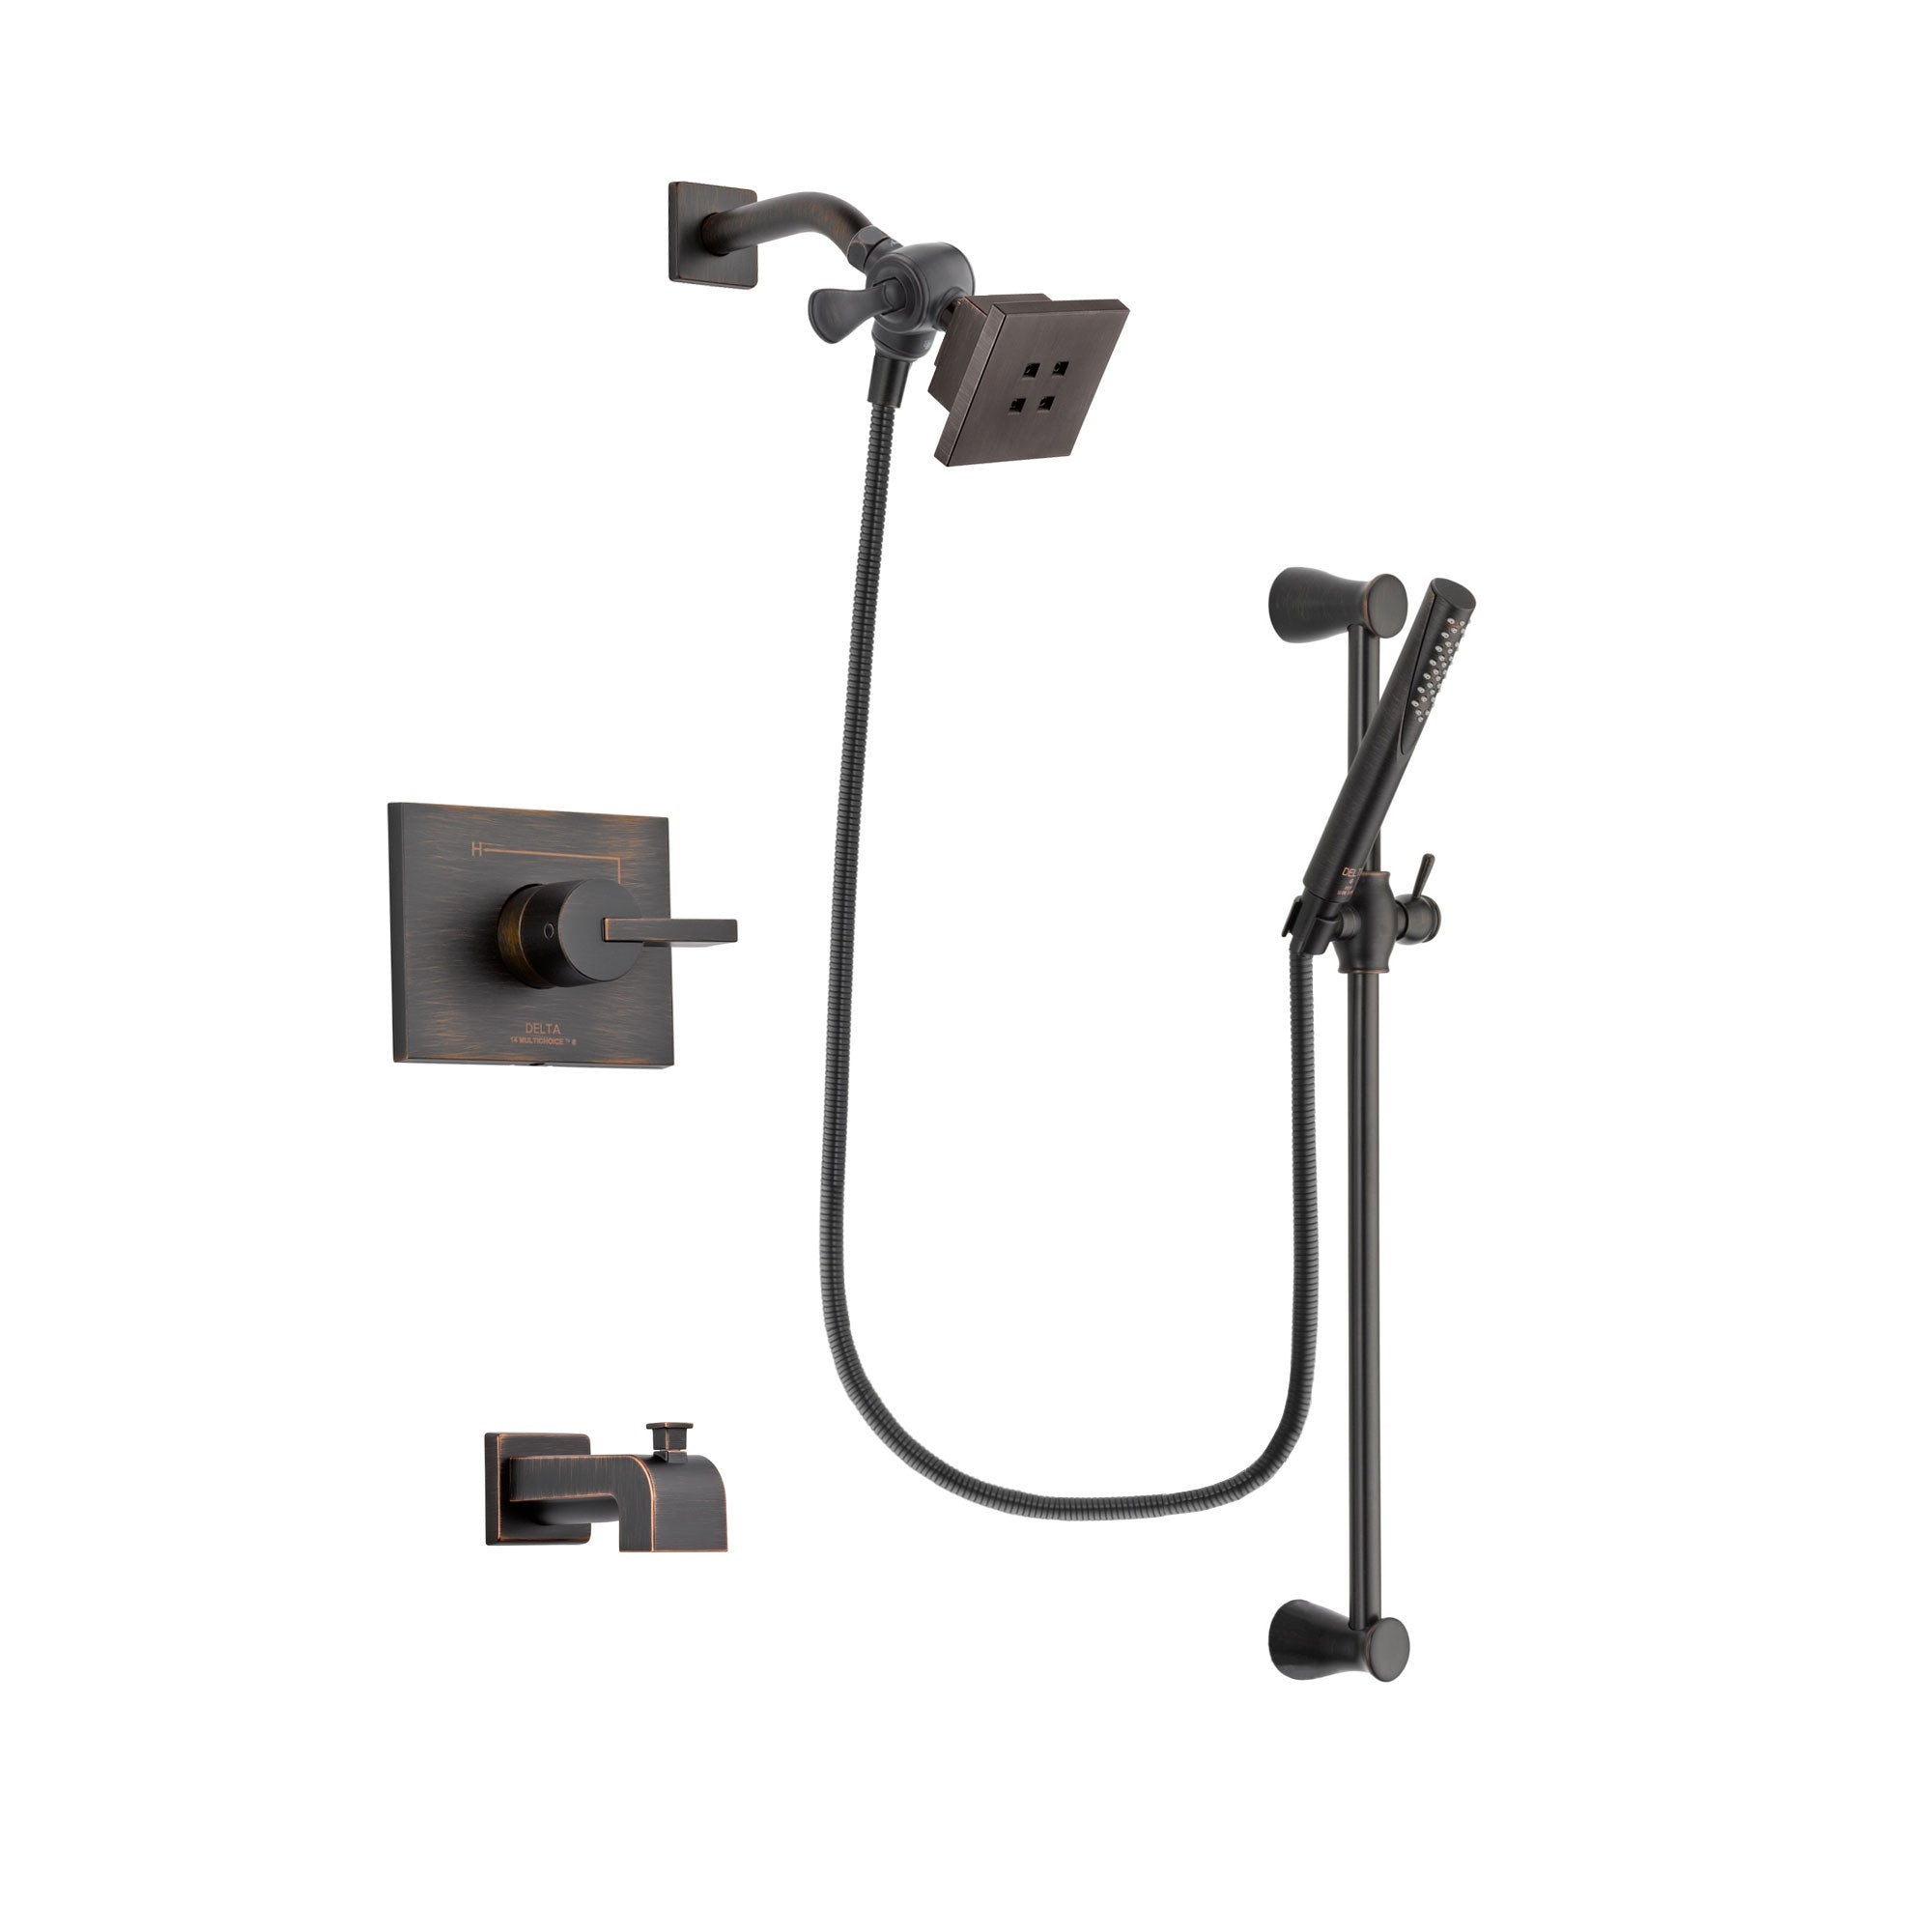 Delta Vero Venetian Bronze Finish Tub and Shower Faucet System Package with Square Showerhead and Modern Hand Shower with Slide Bar Includes Rough-in Valve and Tub Spout DSP3143V